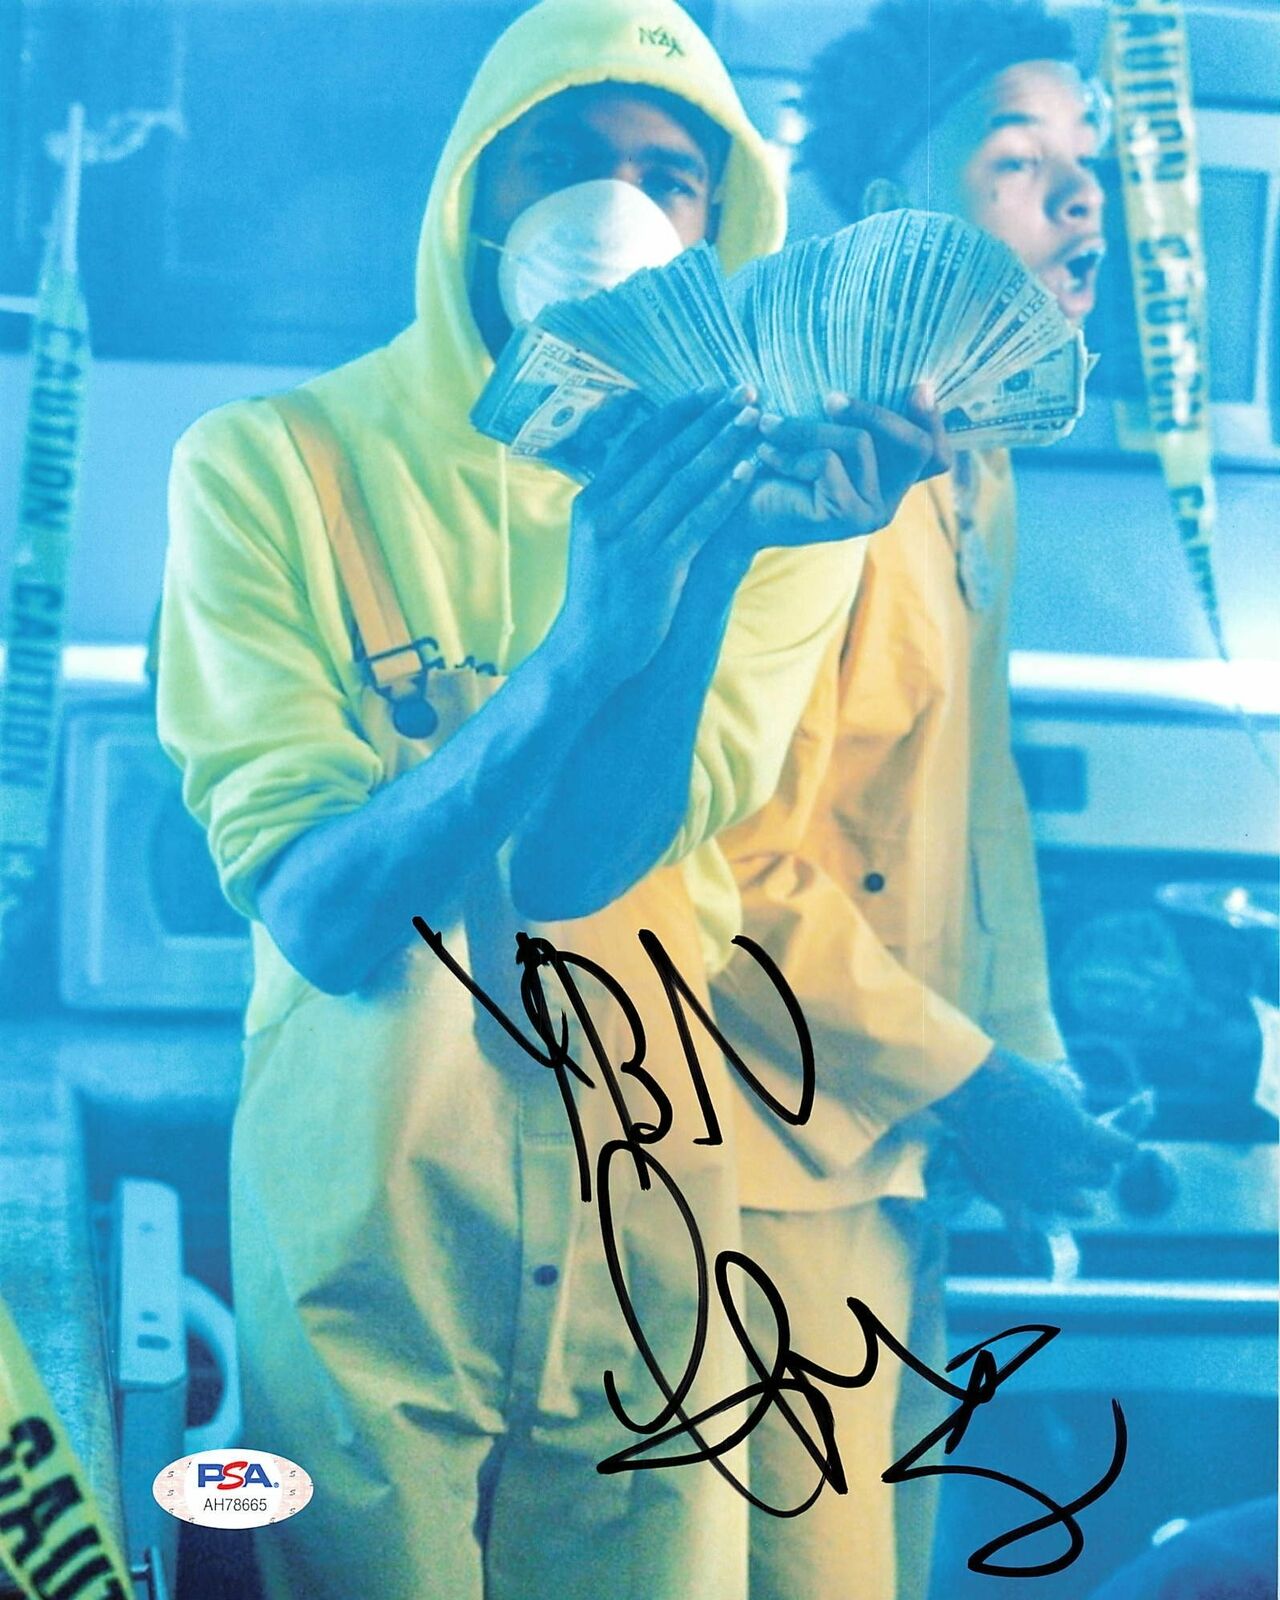 YBN Almighty J signed 8x10 Photo Poster painting PSA/DNA Autographed Rapper